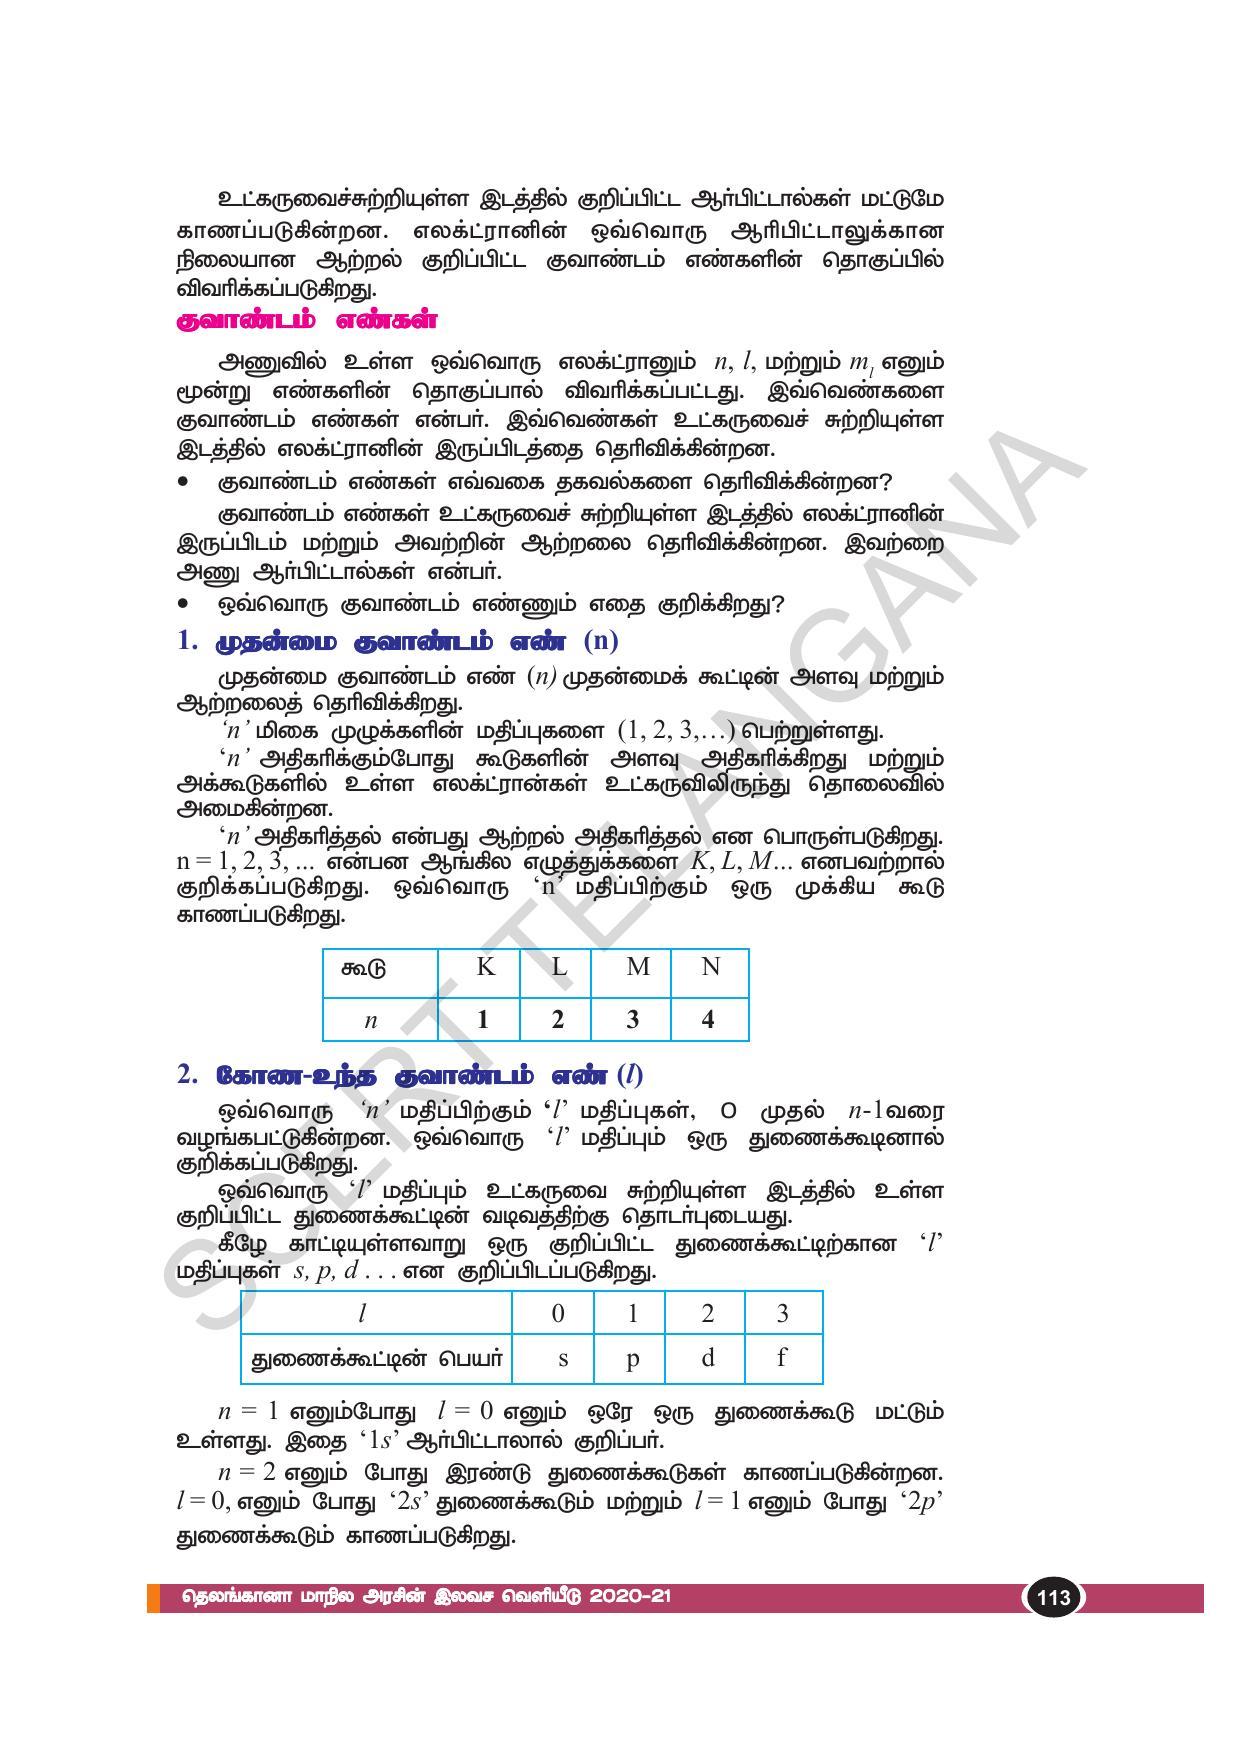 TS SCERT Class 10 Physical Science(Tamil Medium) Text Book - Page 125